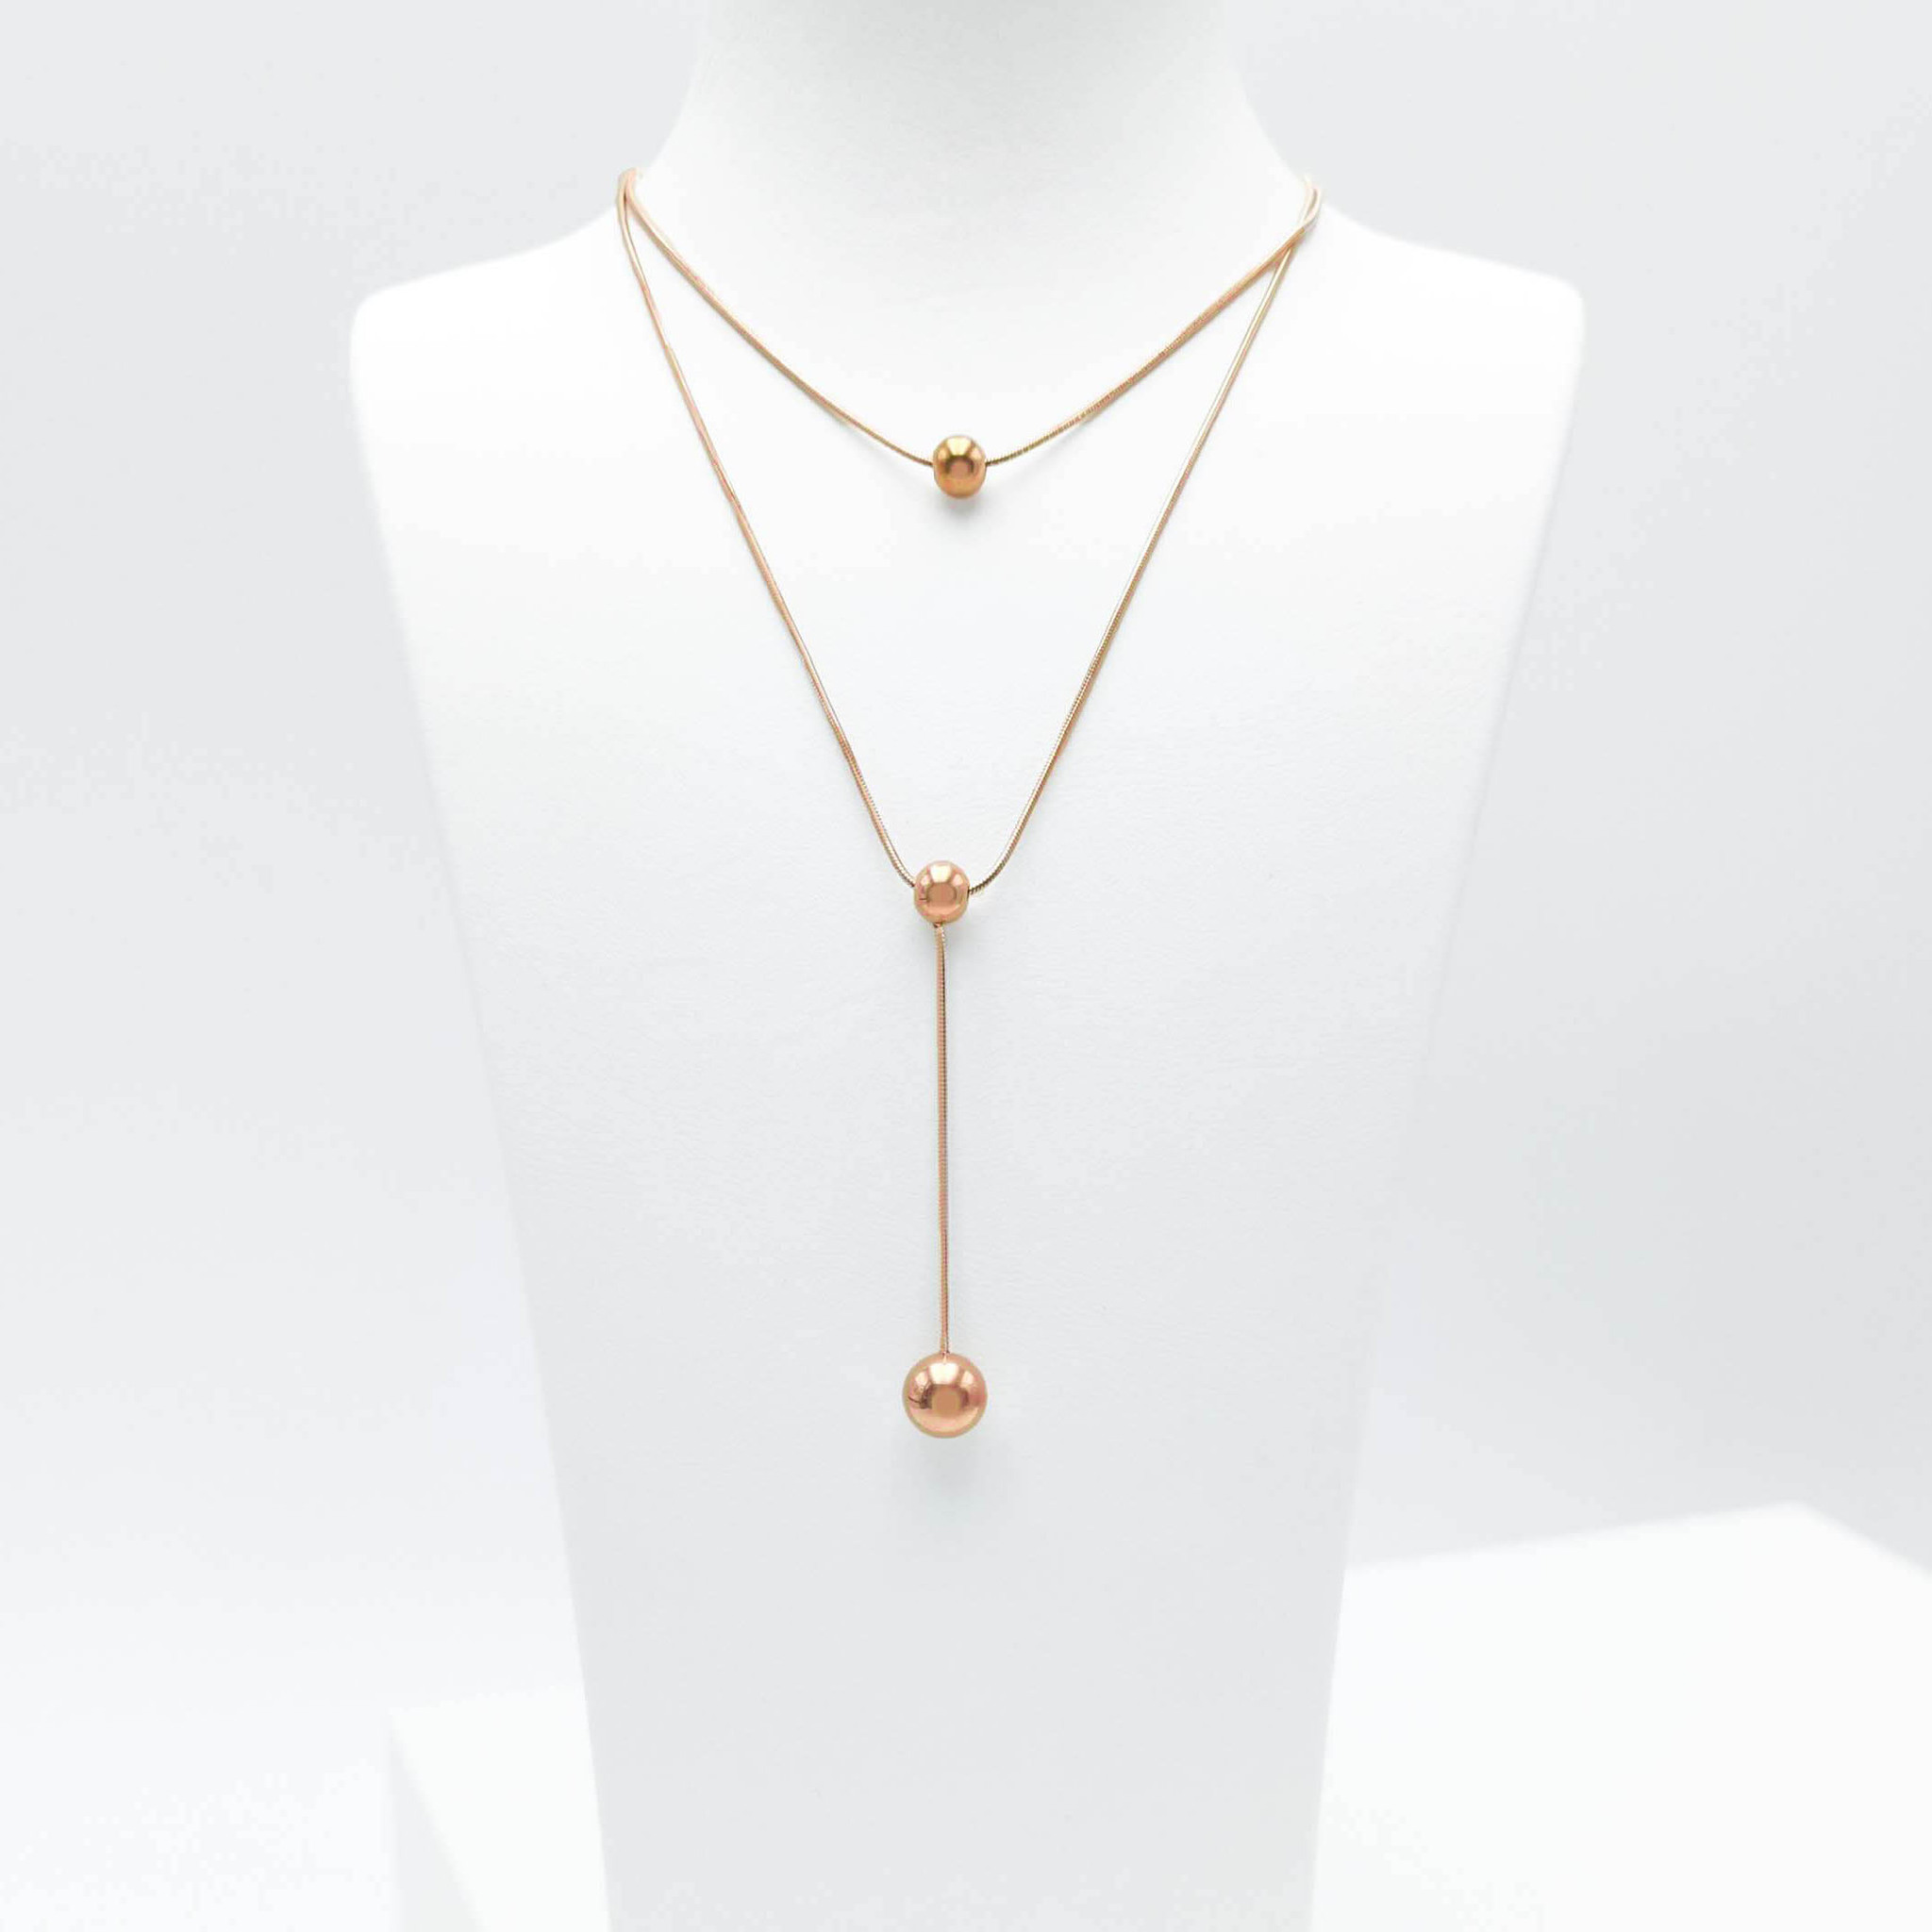 1- Prestige Beauty Orbits Halsband Modern and trendy Necklace and women jewelry and accessories from SWEVALI fashion Sweden